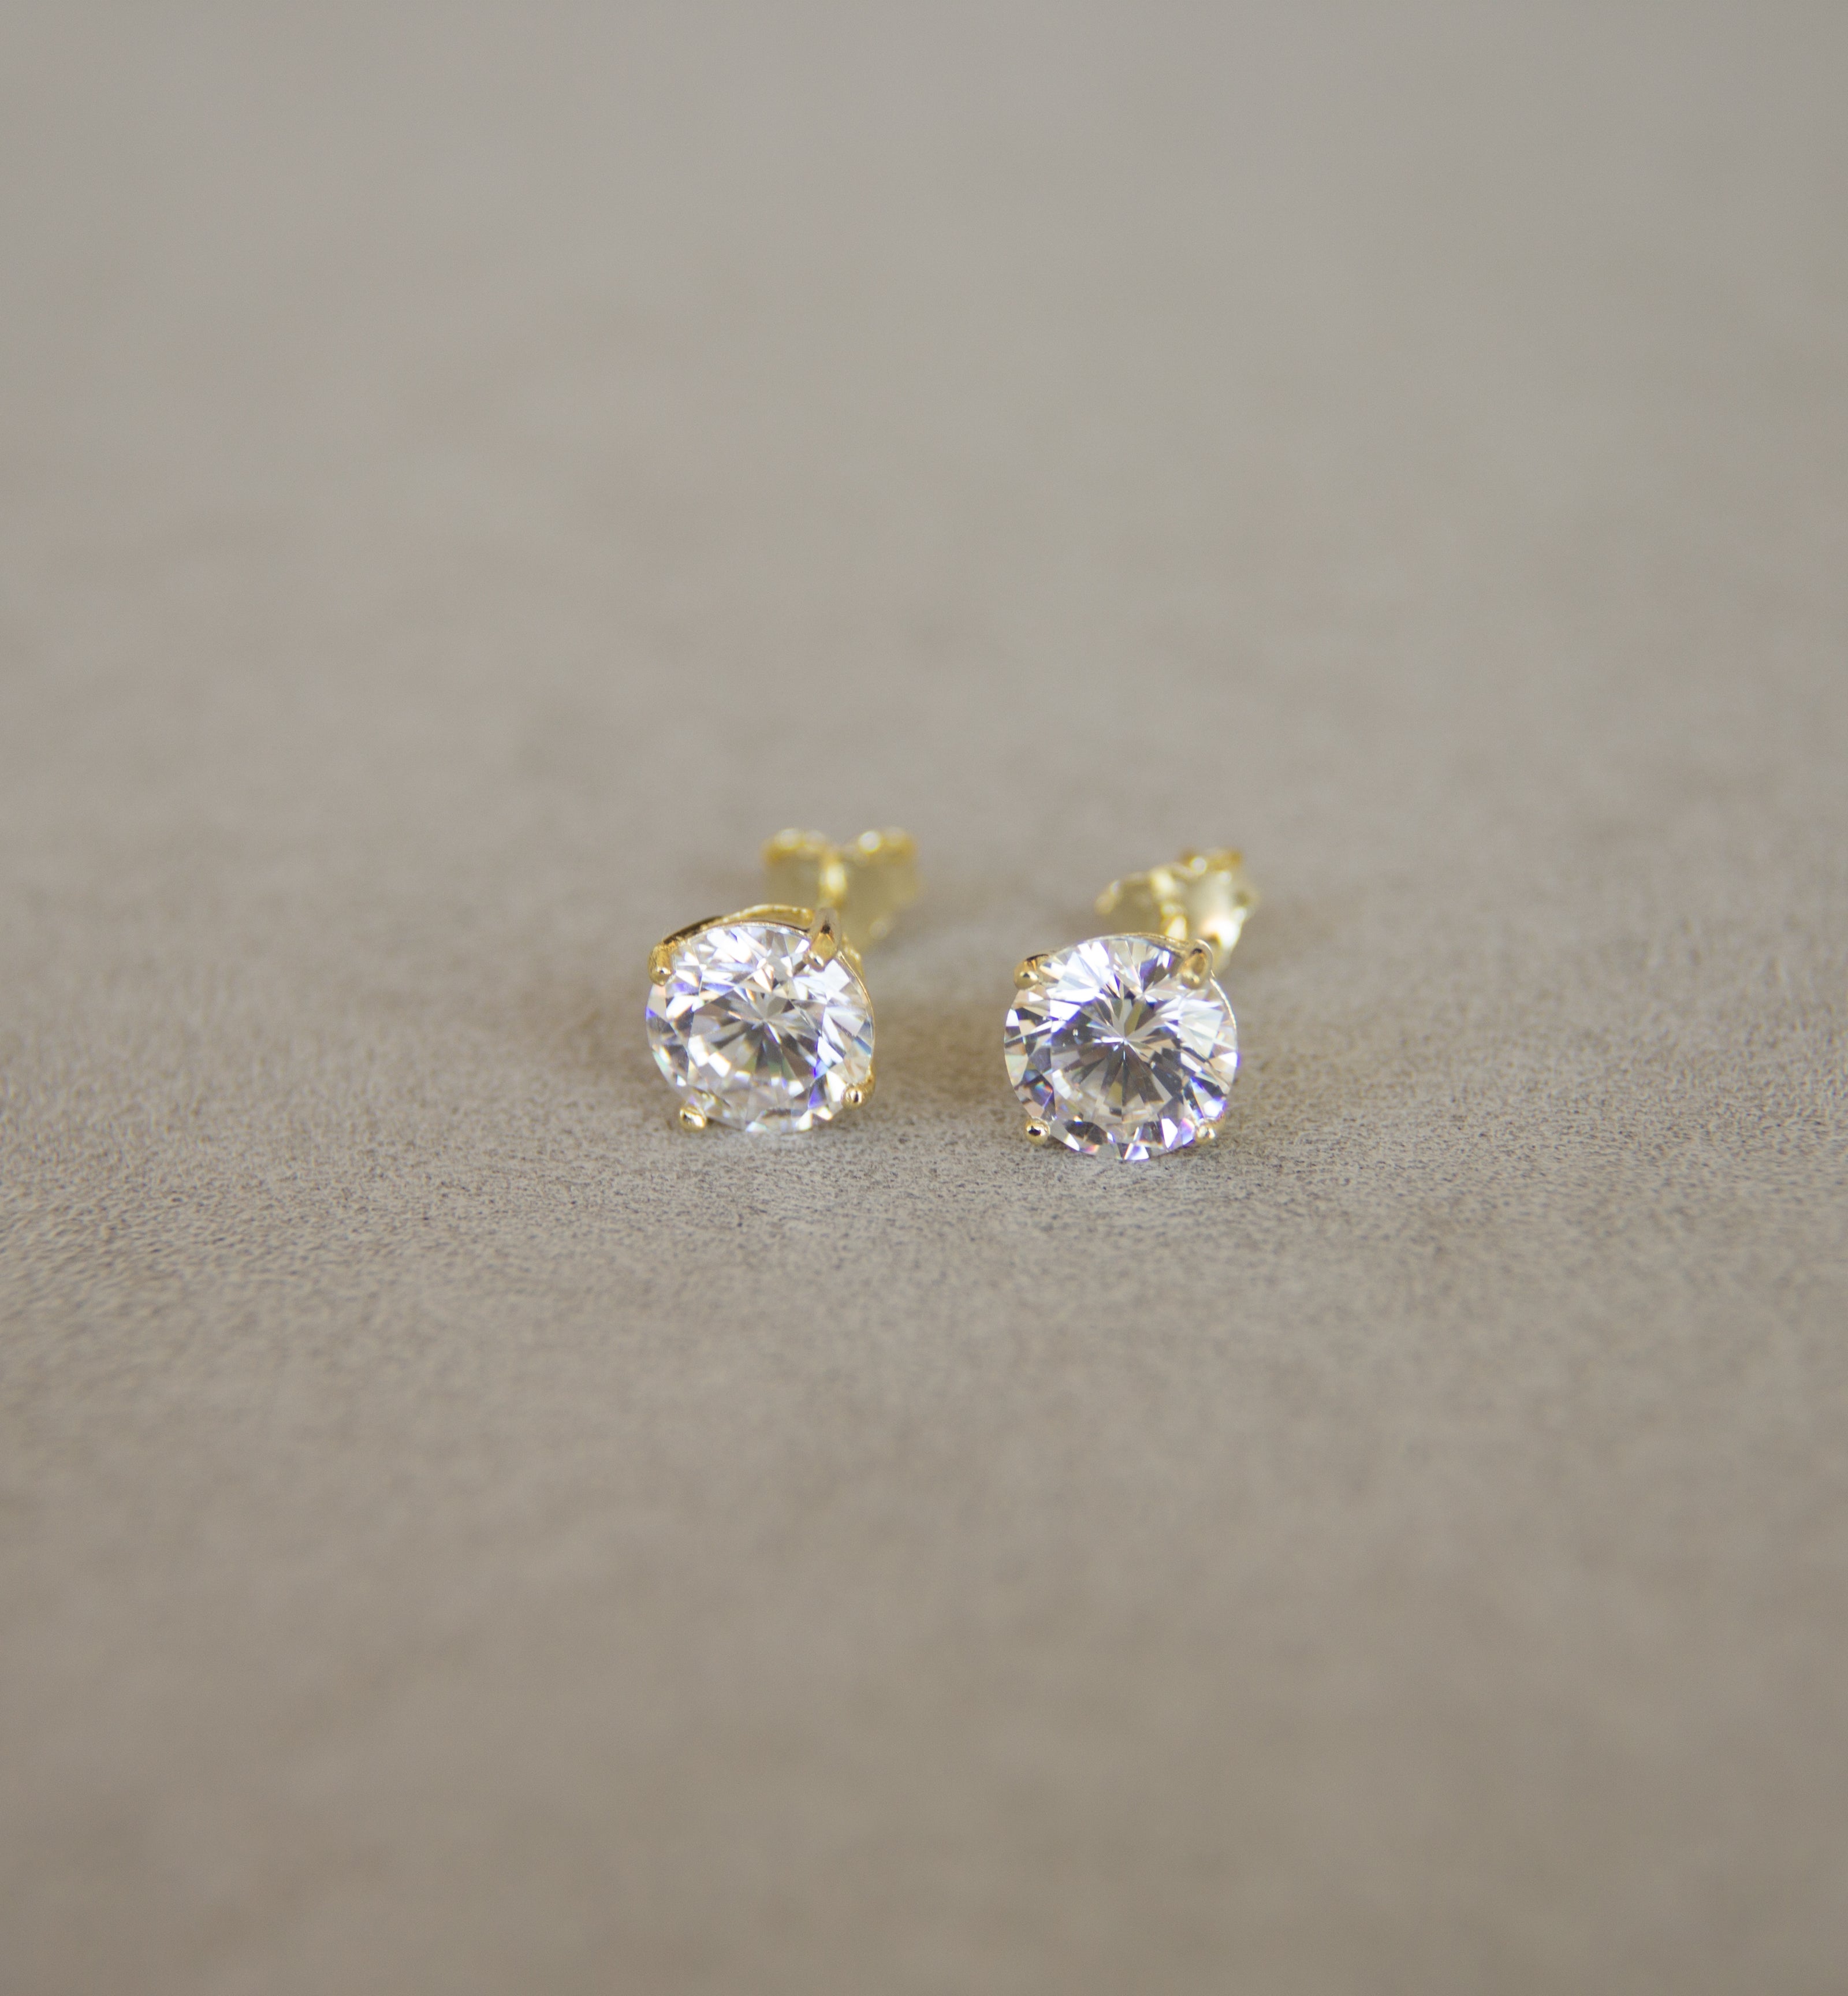 Silver 925 Solitaire Earrings